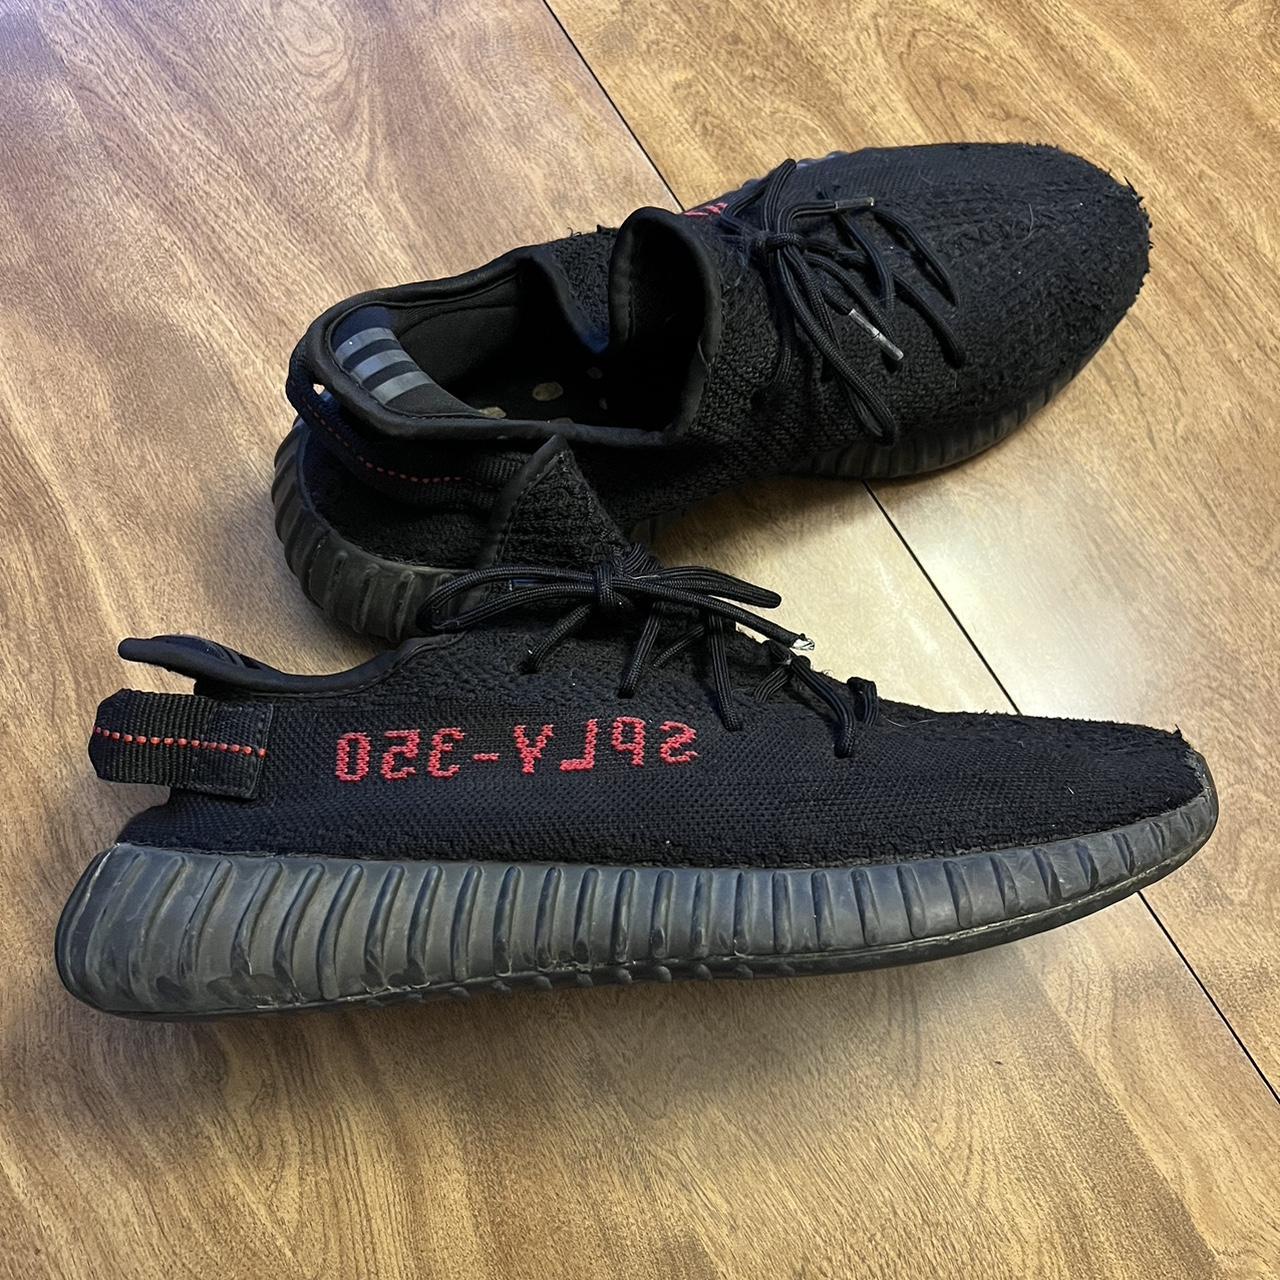 Yeezy 350 v2 Black and Red Size US11 *price always... - Depop